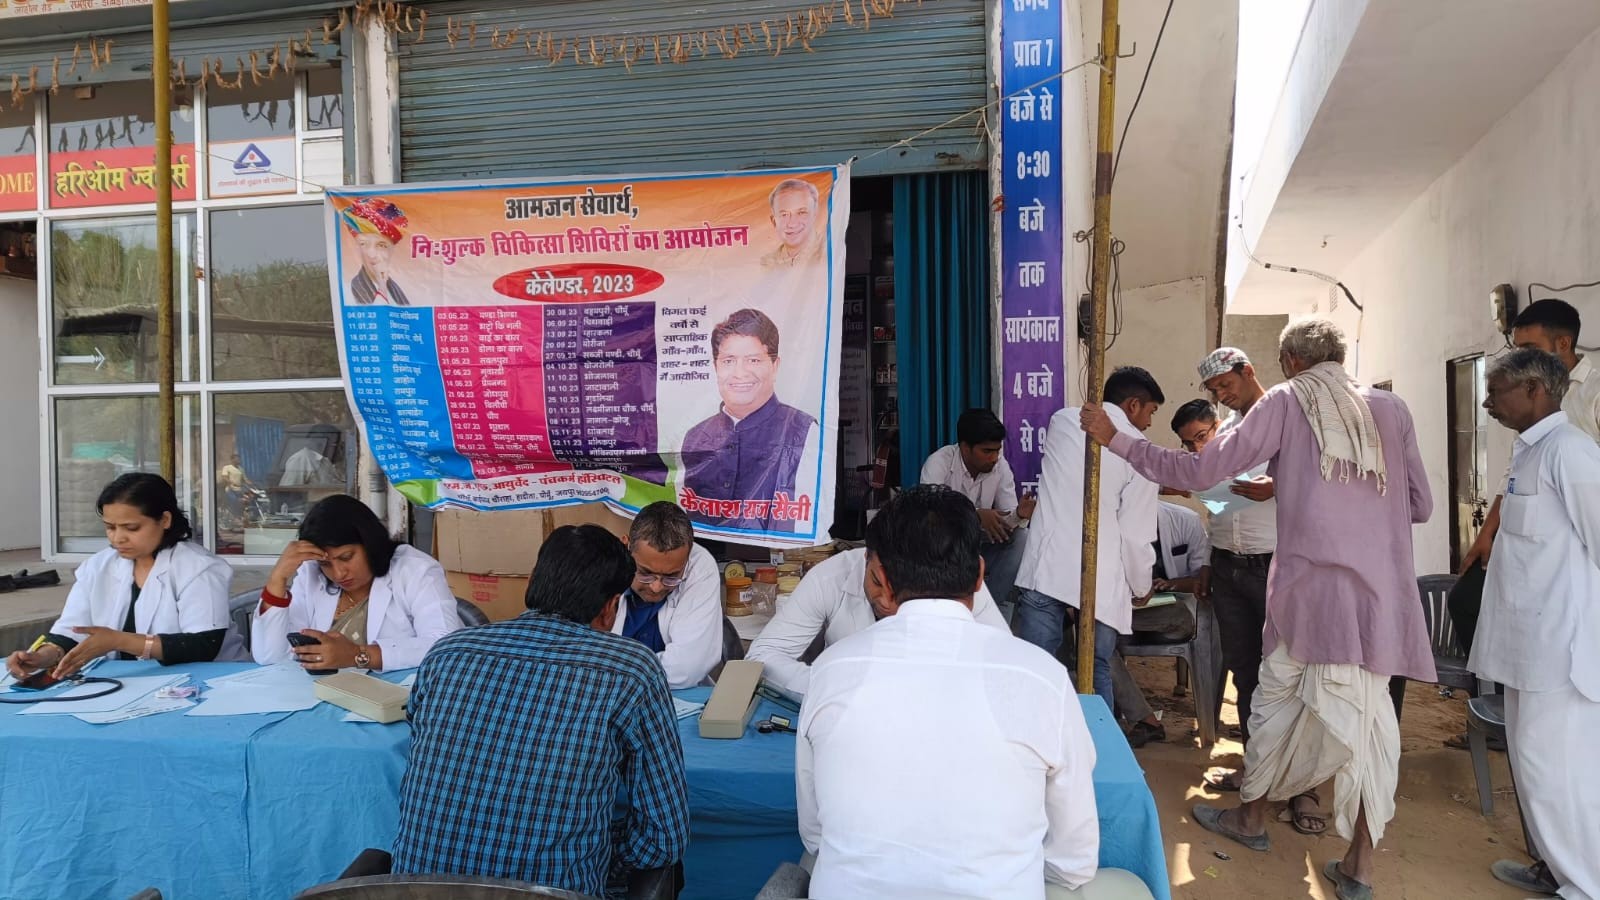 WEEKLY FREE MEDICAL CAMP ORGANIZED AT VILLAGE RAMPURA ON DATED 22 FEBRUARY 2023 AS PER SCHEDULE